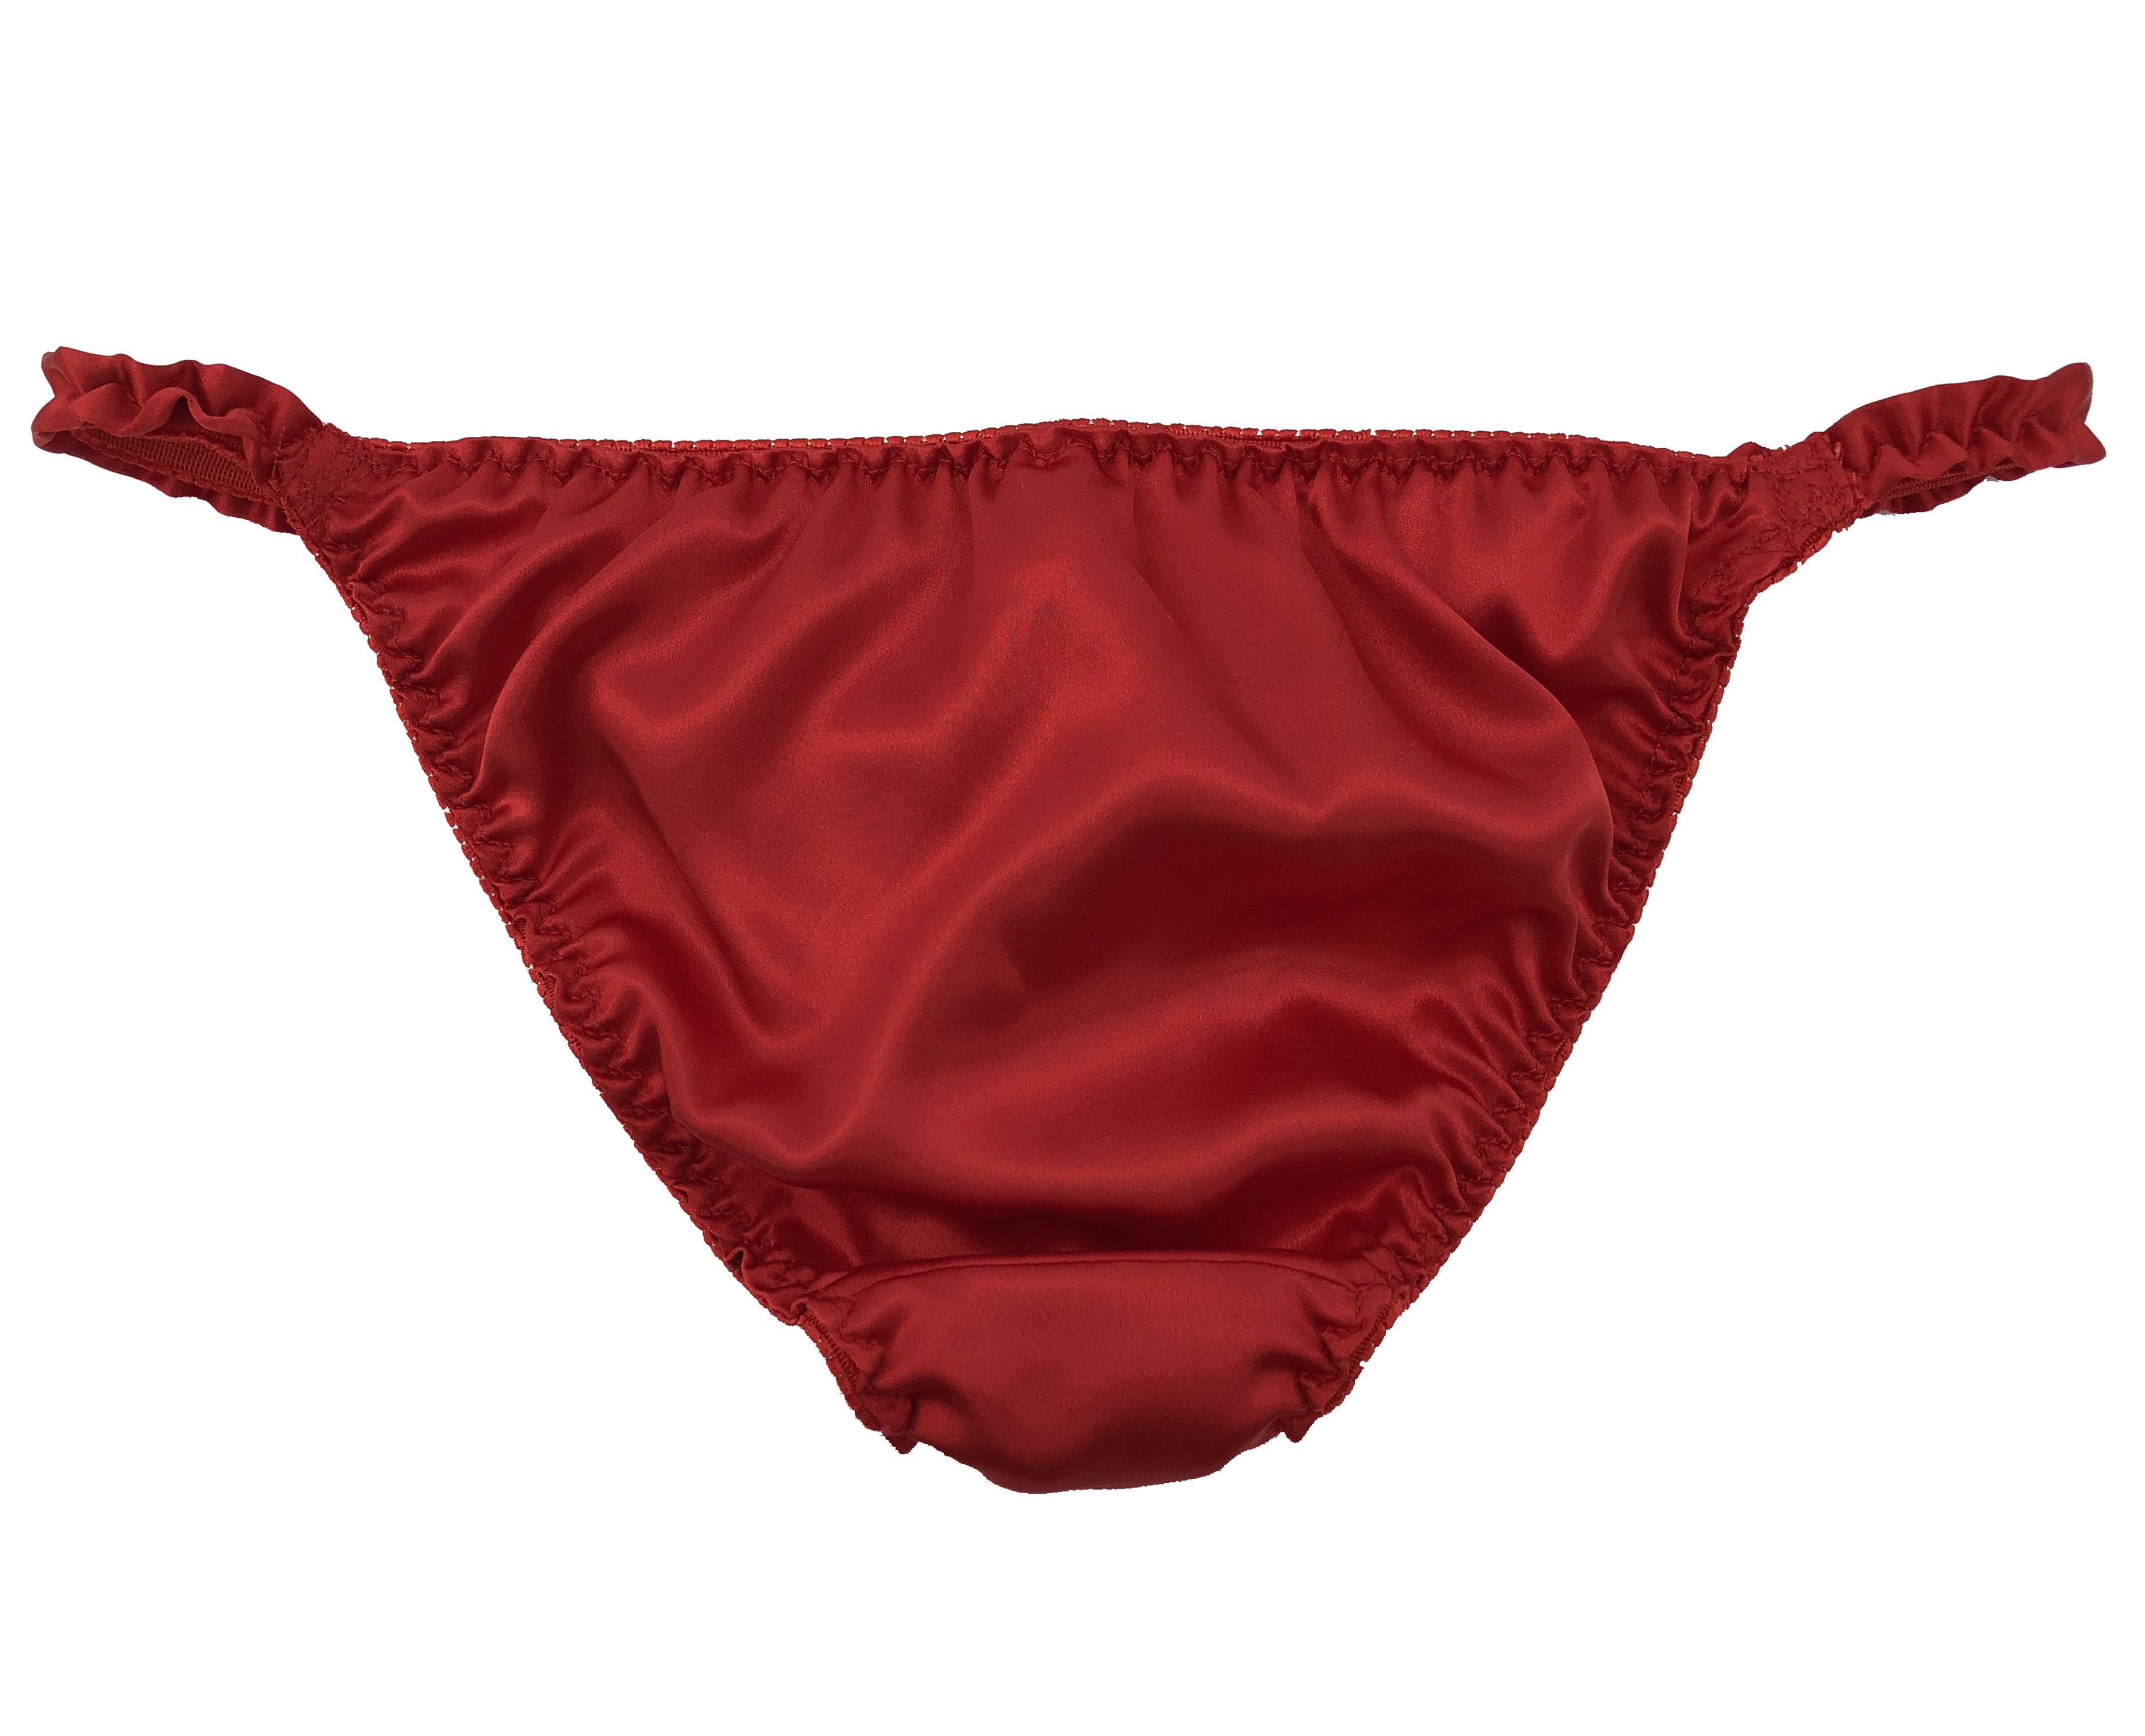 Red Satin Panties Pictures